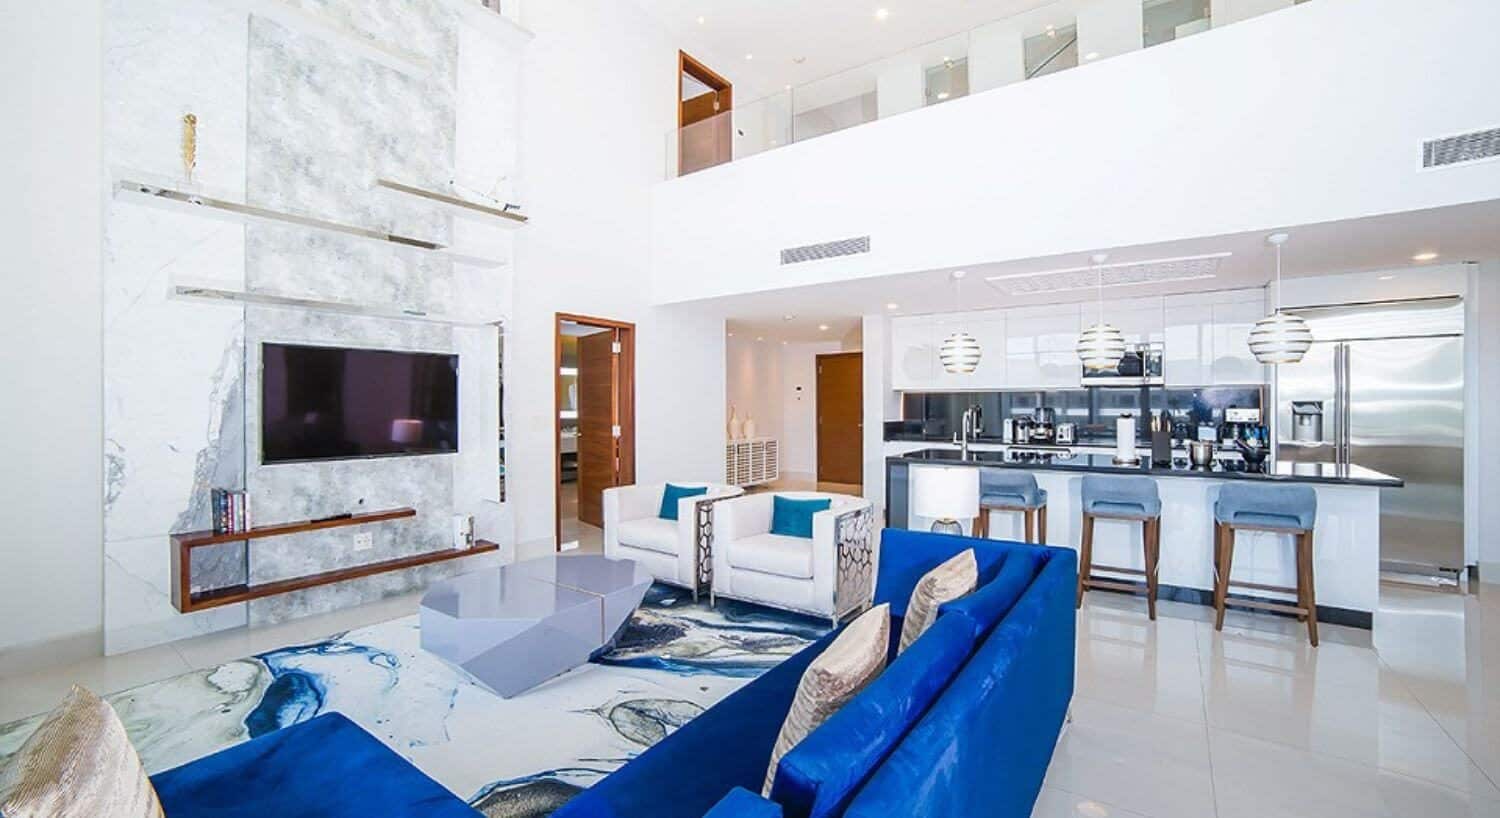 An open floor plan living room and kitchen with blue sofas and white armchairs, a flat screen TV, a gourmet kitchen with stainless steel appliances, and a door open to a bathroom.